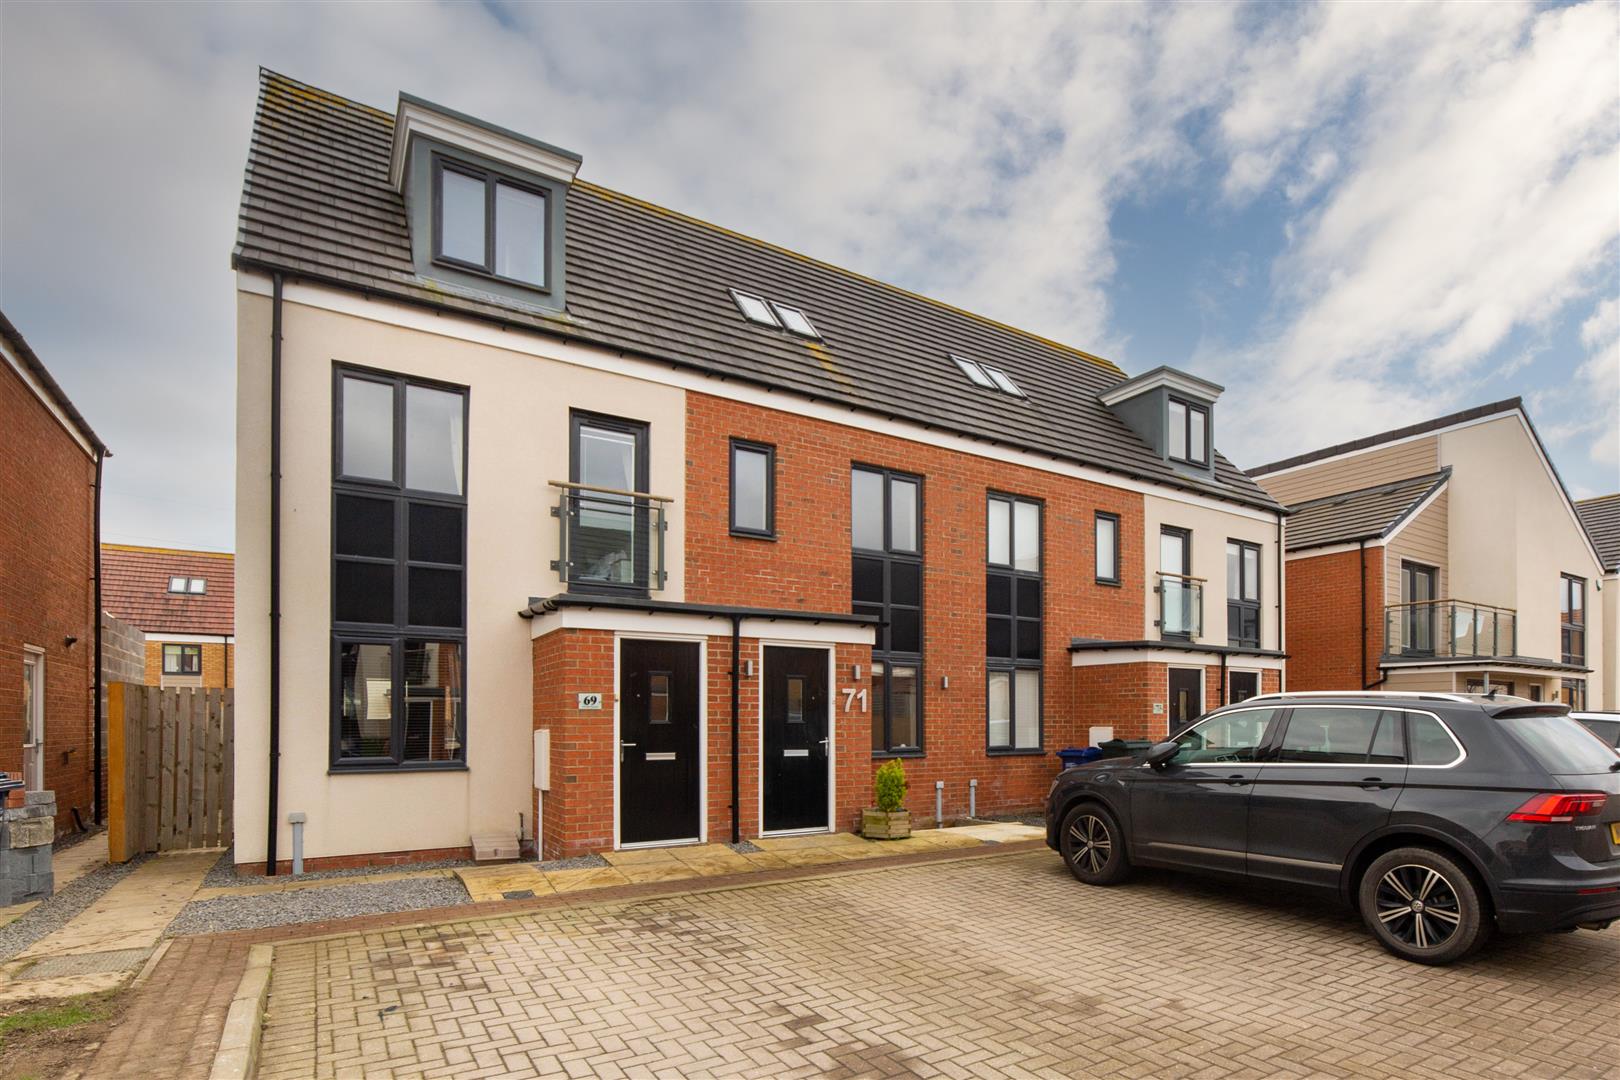 3 bed town house for sale in Greville Gardens, Great Park, NE13